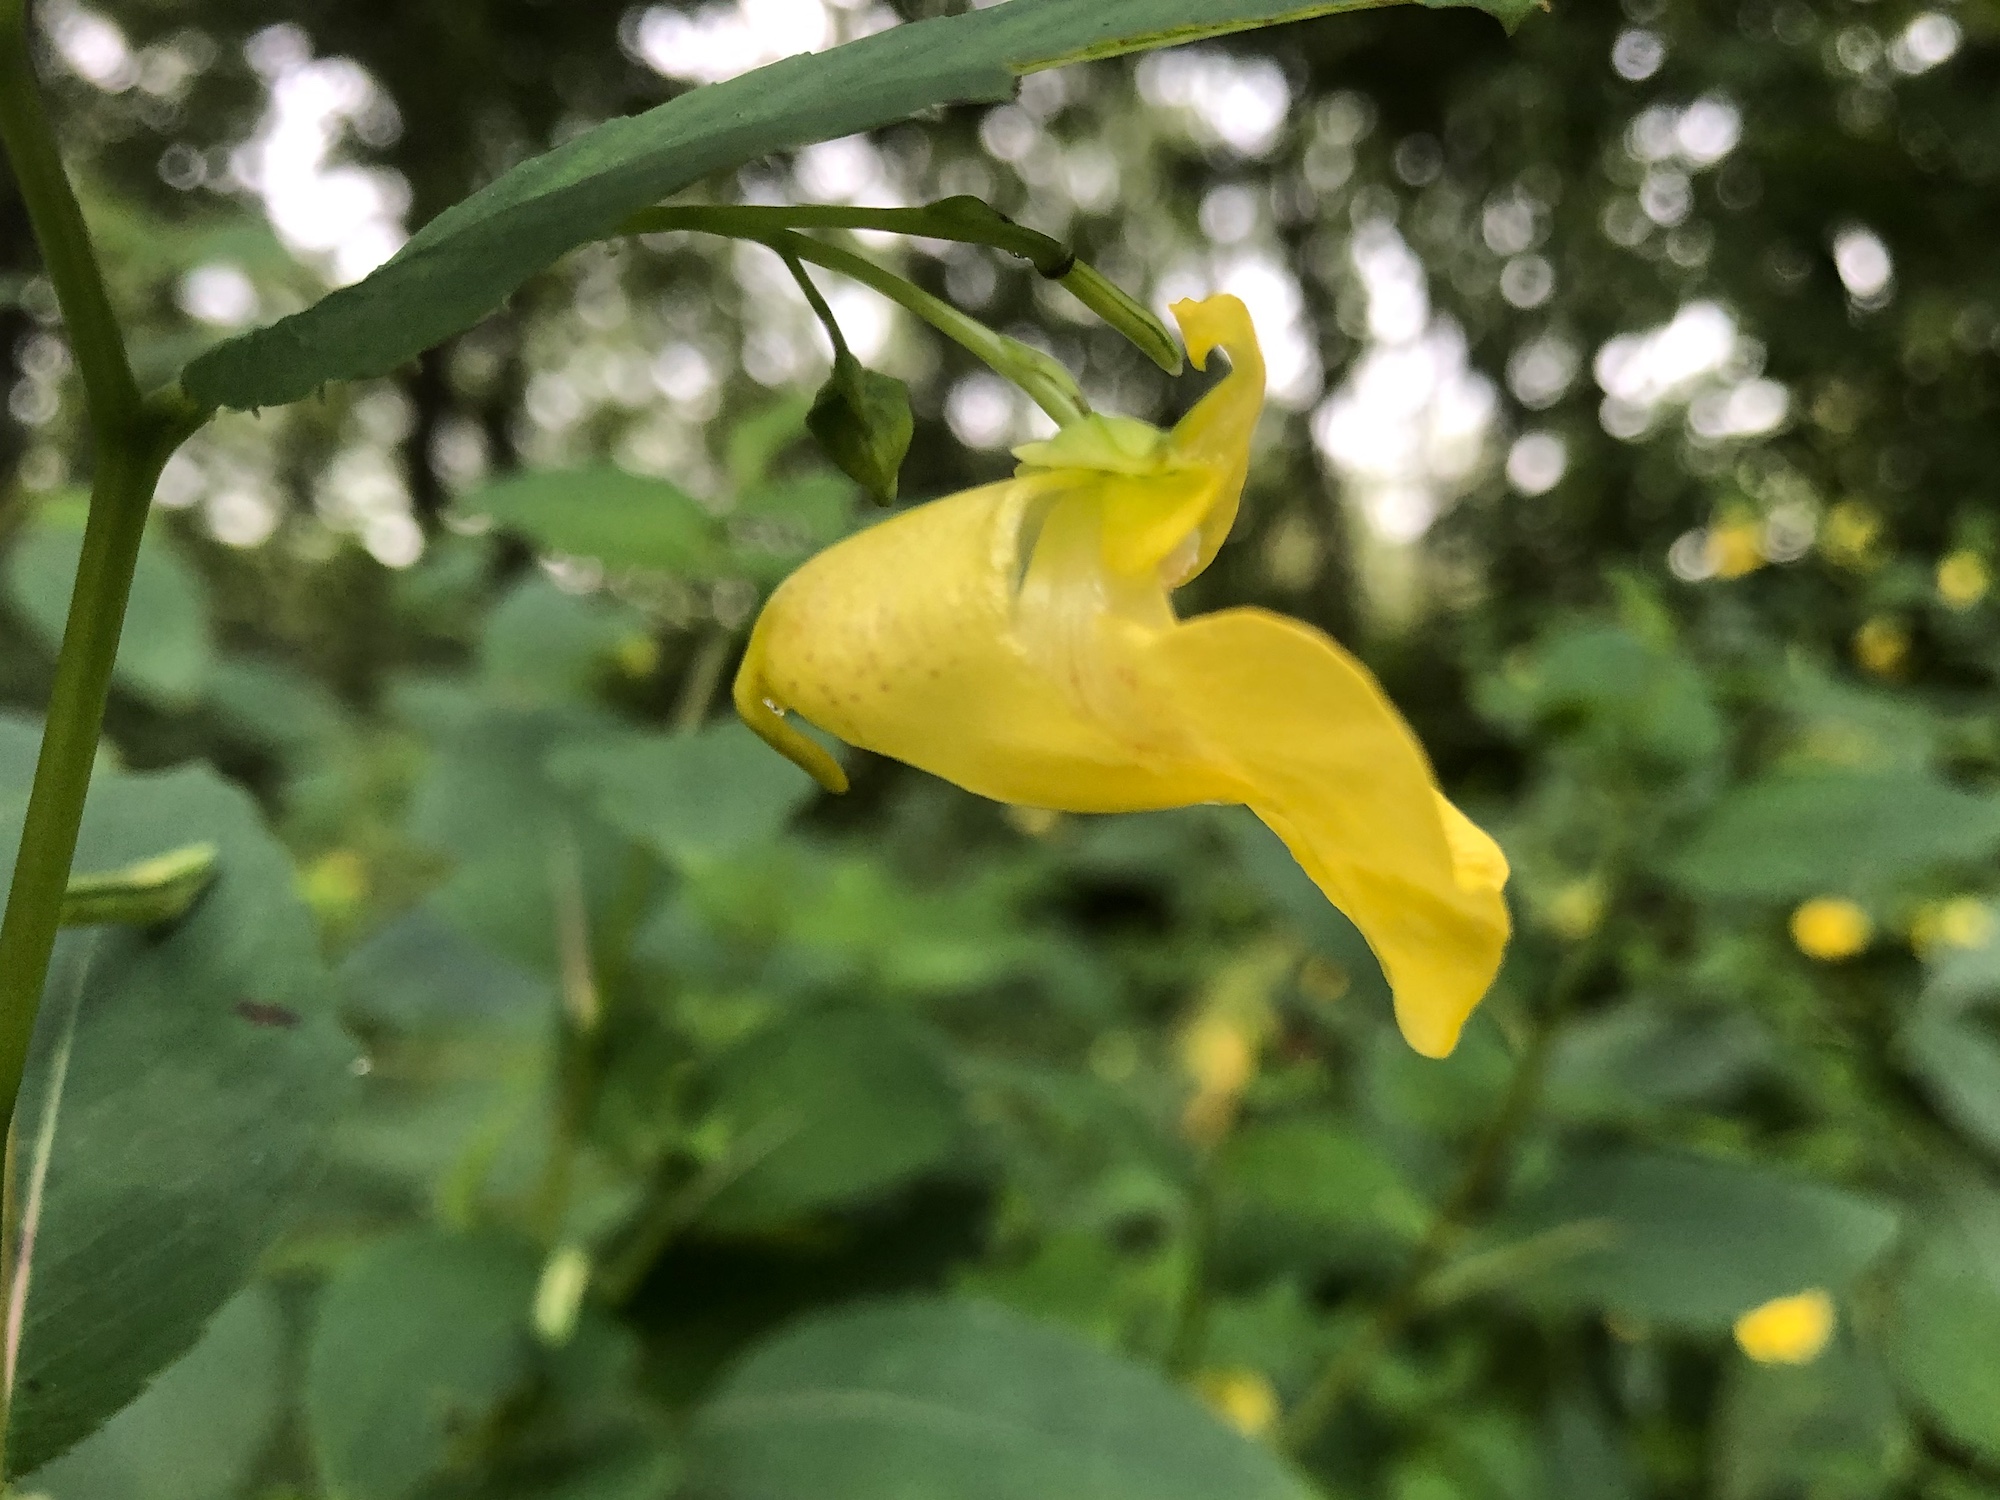 Yellow Jewelweed near the Duck Pond on August 21, 2019.